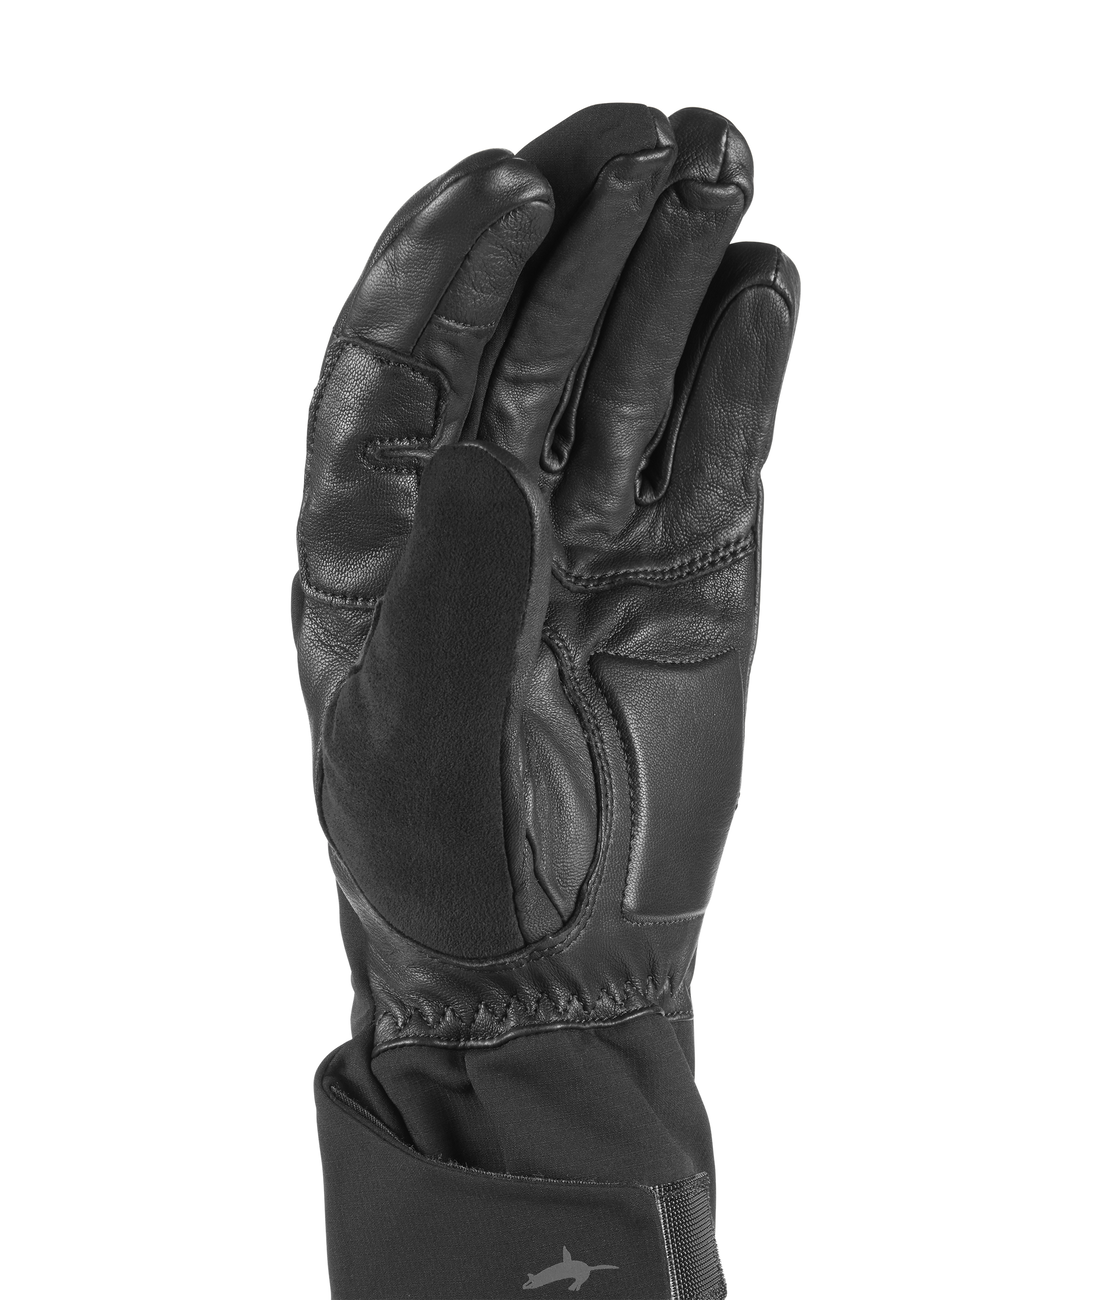 Fring - Waterproof Extreme Cold weather Insulated Gauntlet with Fusion Control